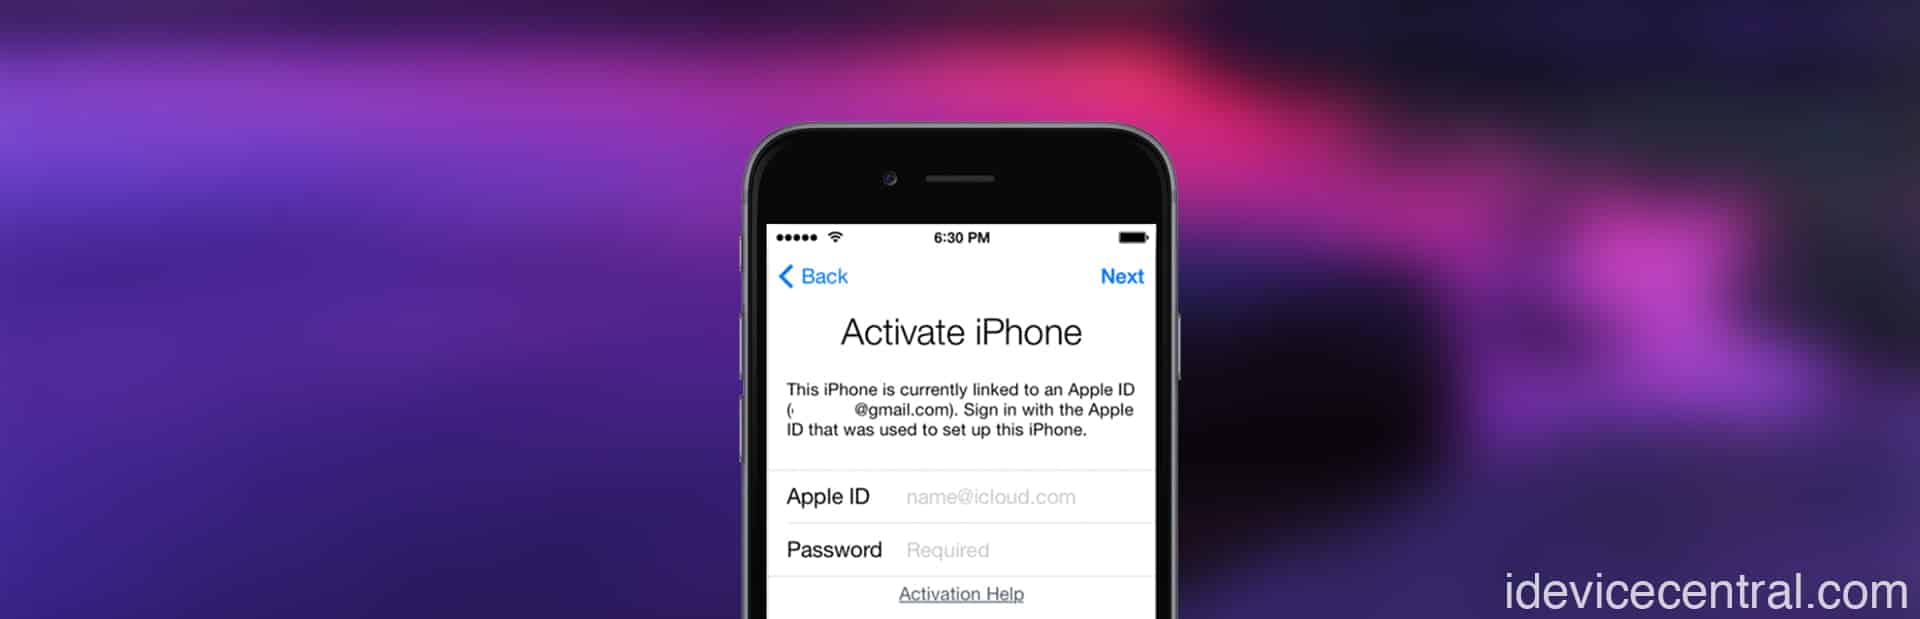 How To Skip iCloud Activation on iOS 16 and iOS 15 & Check IMEI